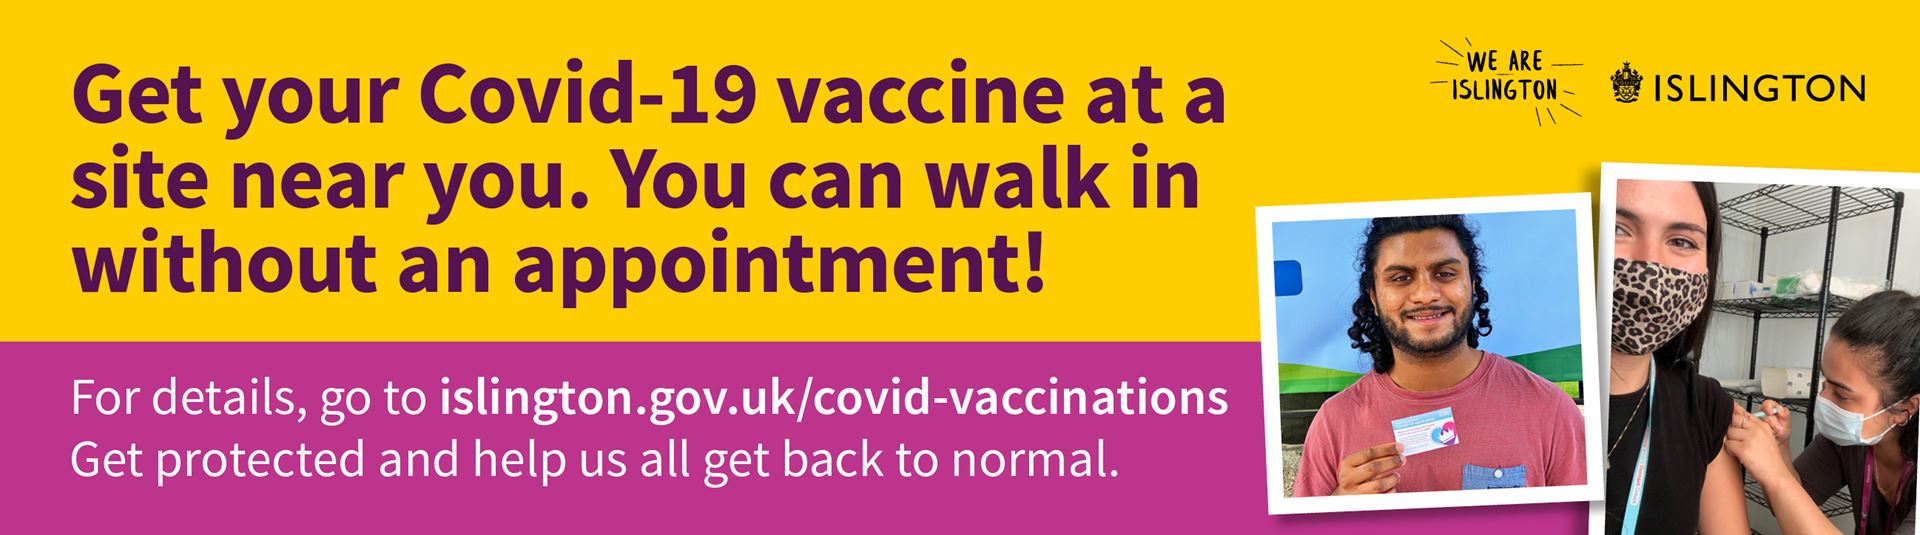 Get your Covid-19 vaccine at a site near you. You can walk in without an appointment